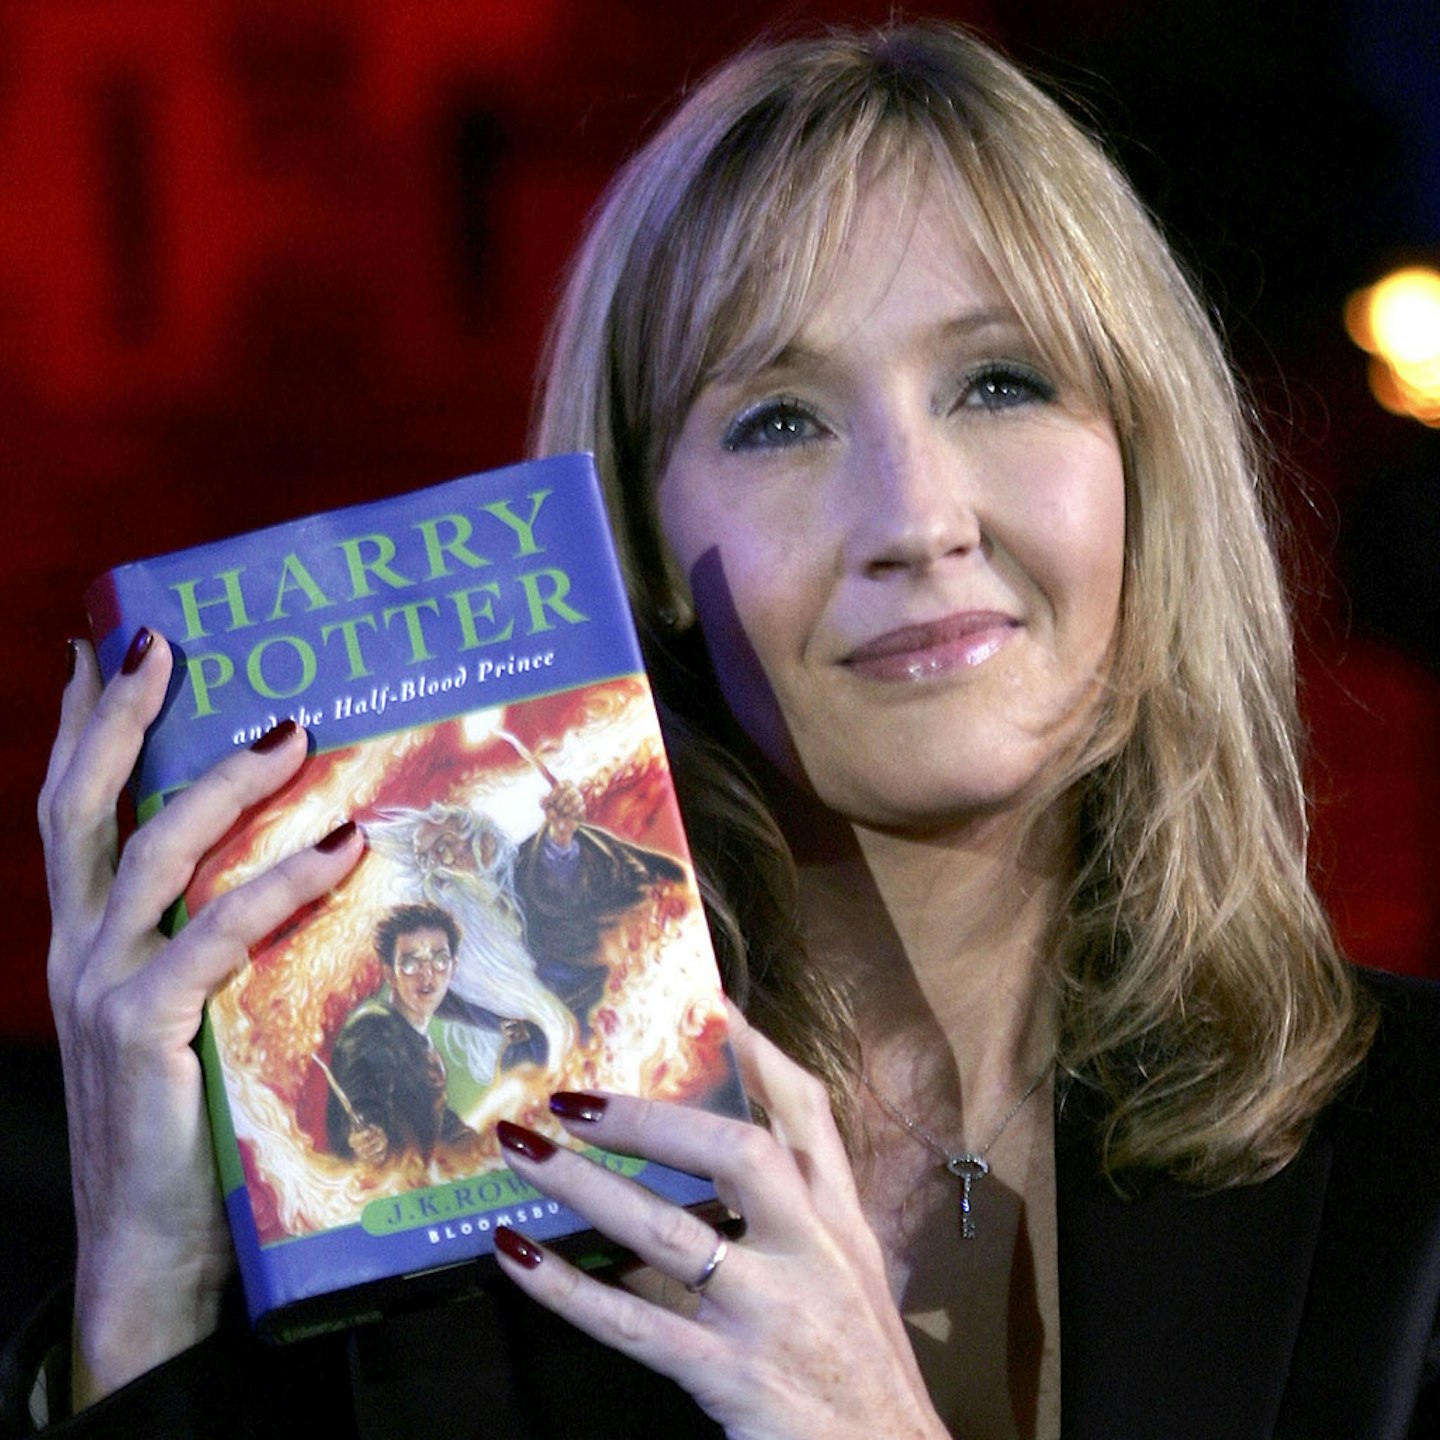 Author J.K. Rowling with her sixth book, Harry Potter and the Half-Blood Prince